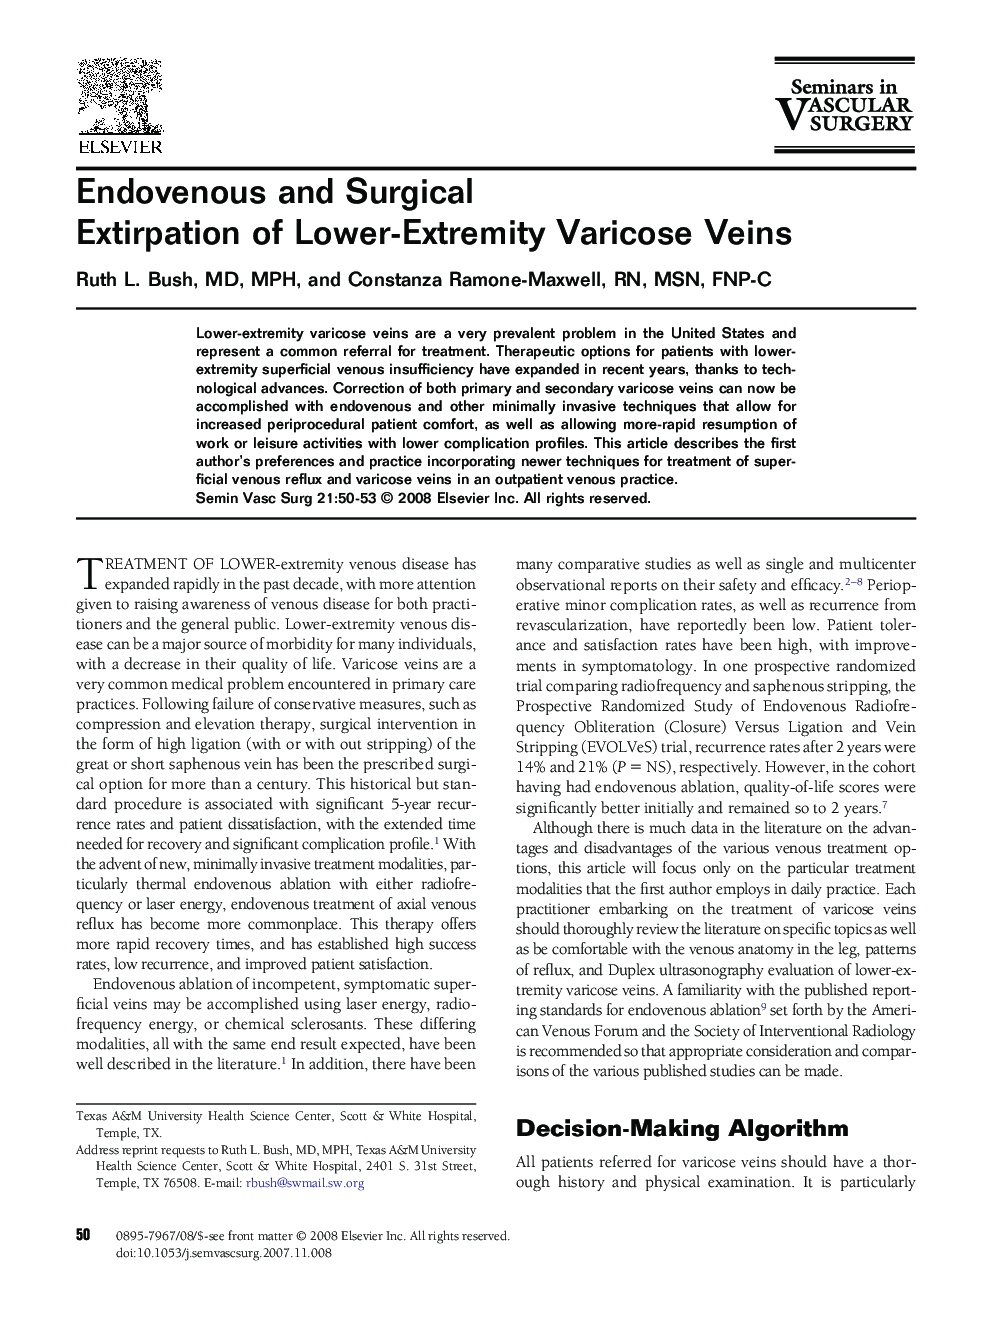 Endovenous and Surgical Extirpation of Lower-Extremity Varicose Veins